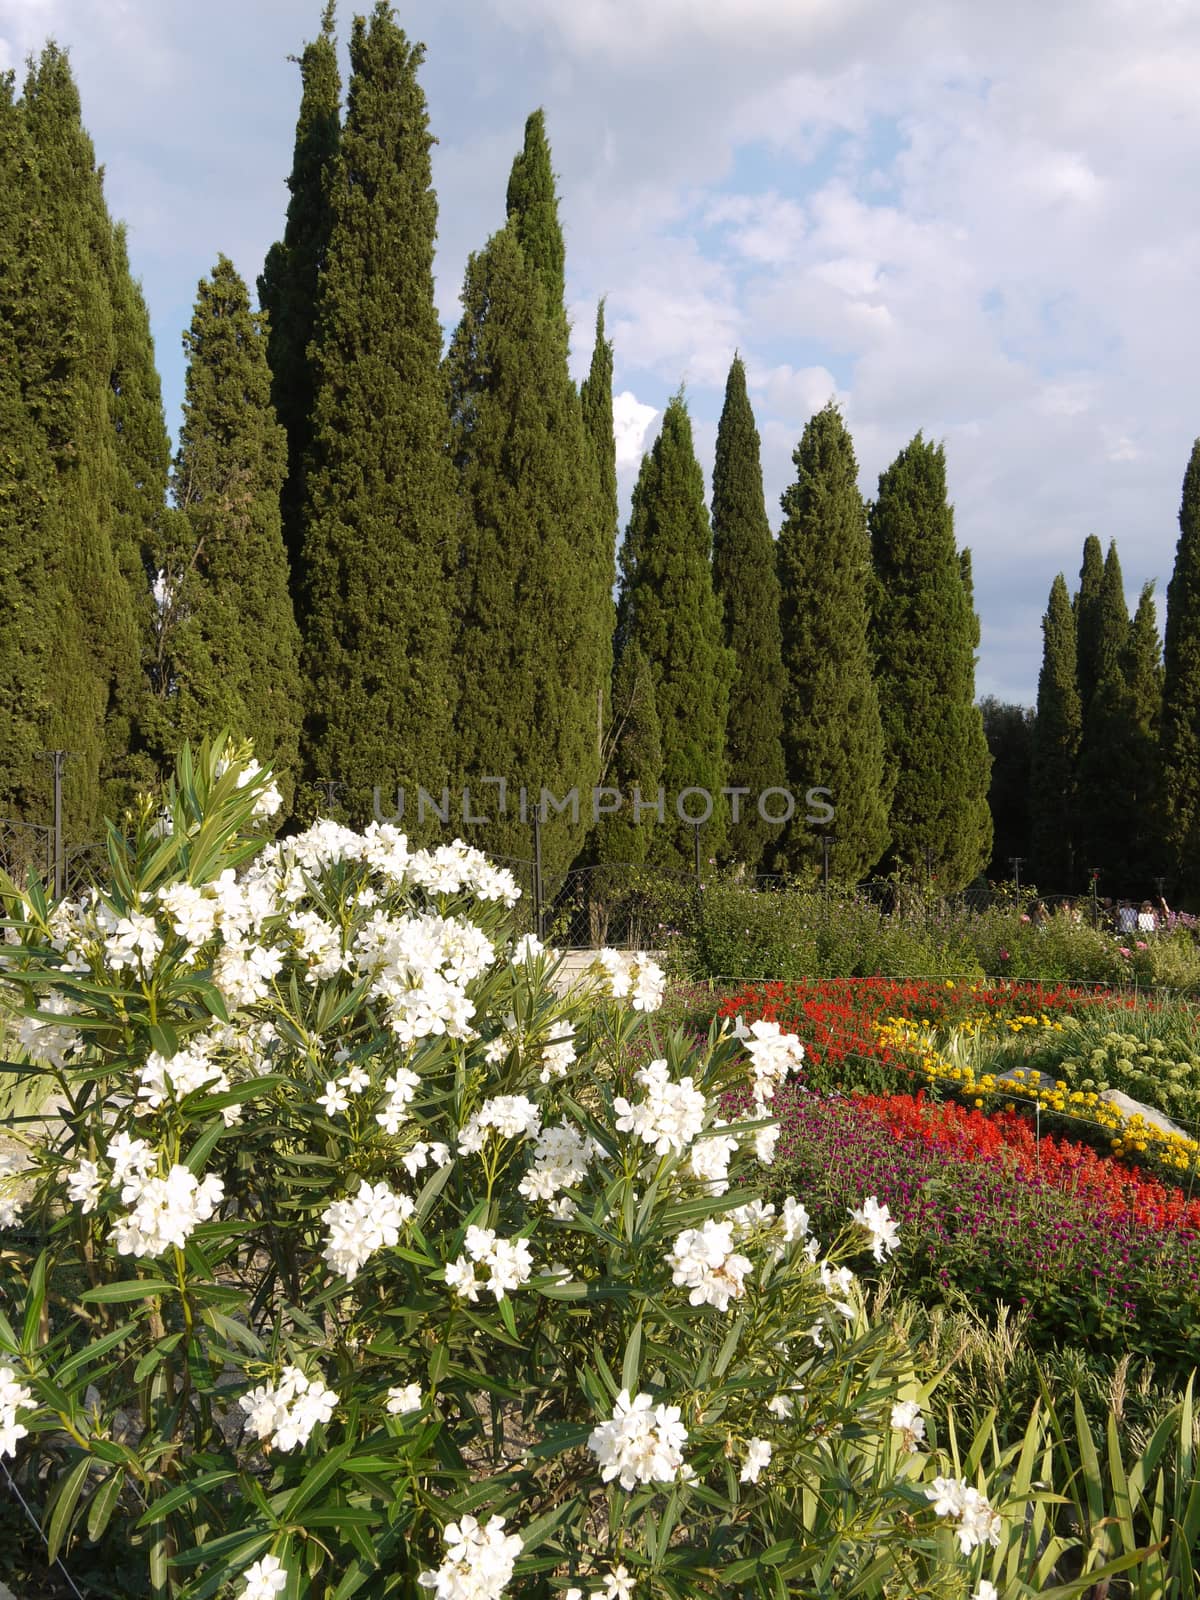 white flowers in the flowerbed against the backdrop of slender trees by Adamchuk